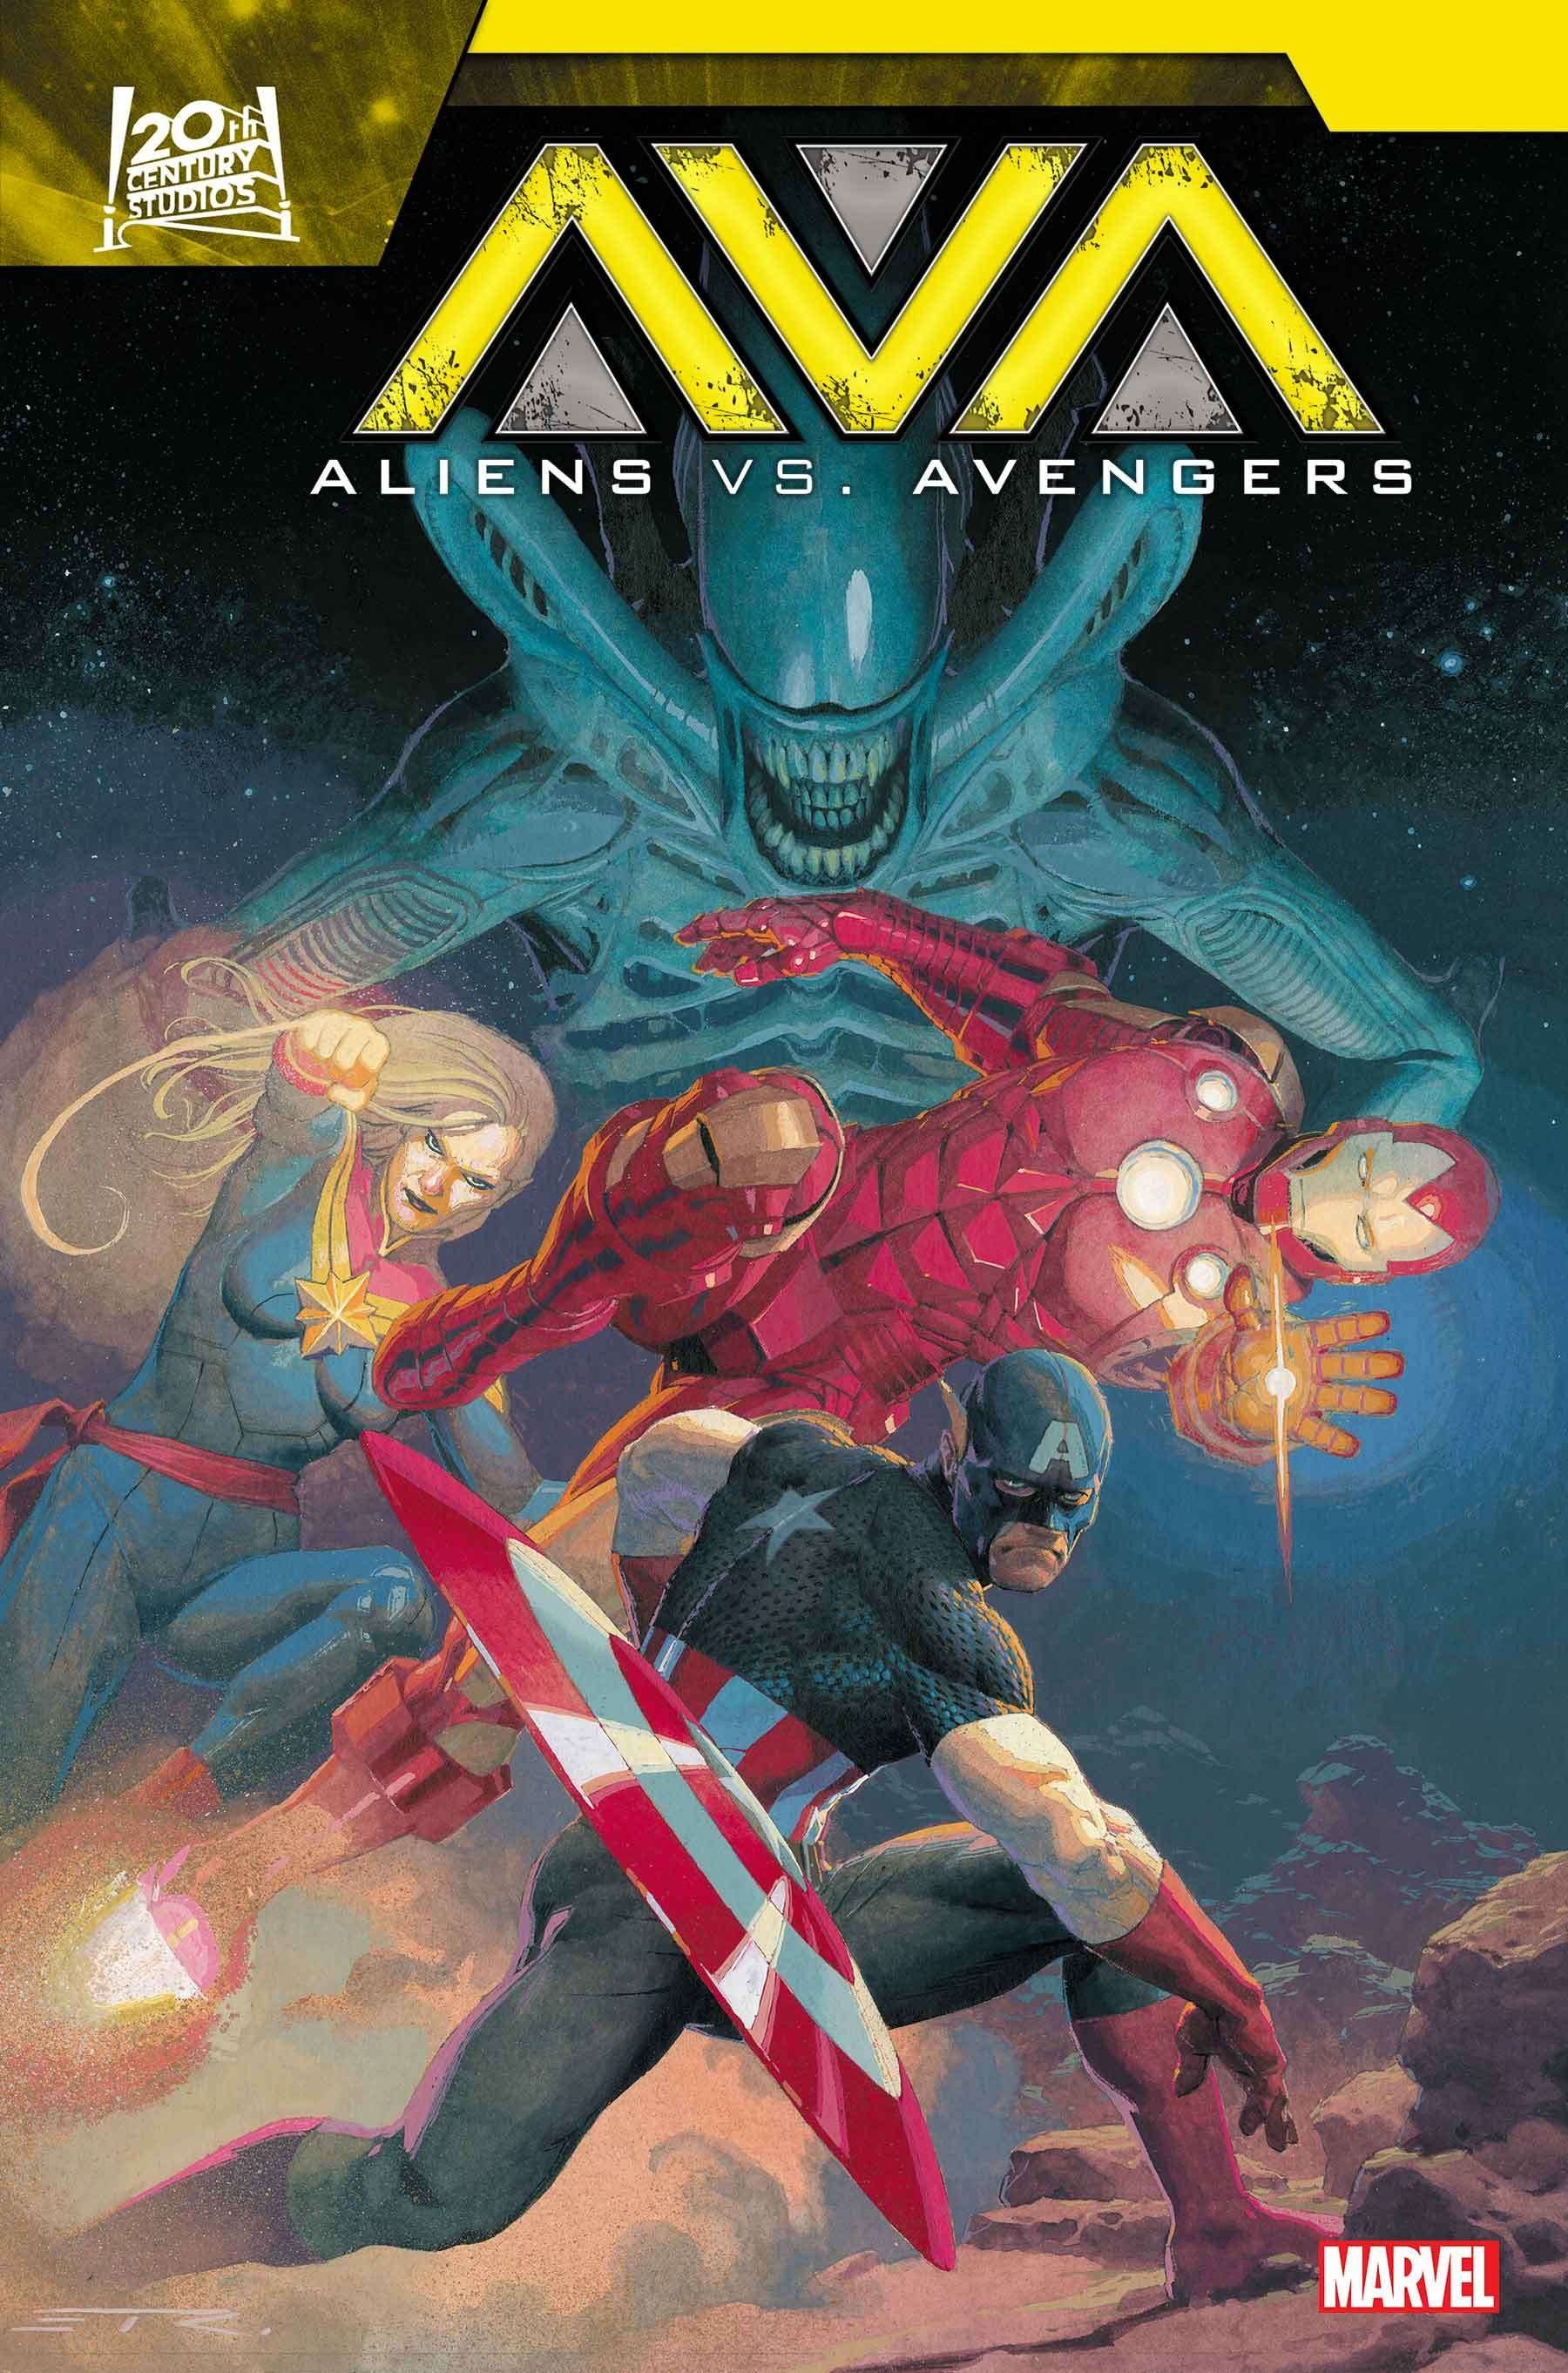 ALIENS VS AVENGERS Launches the Ultimate Crossover, From Acclaimed X-Men Writer Jonathan Hickman